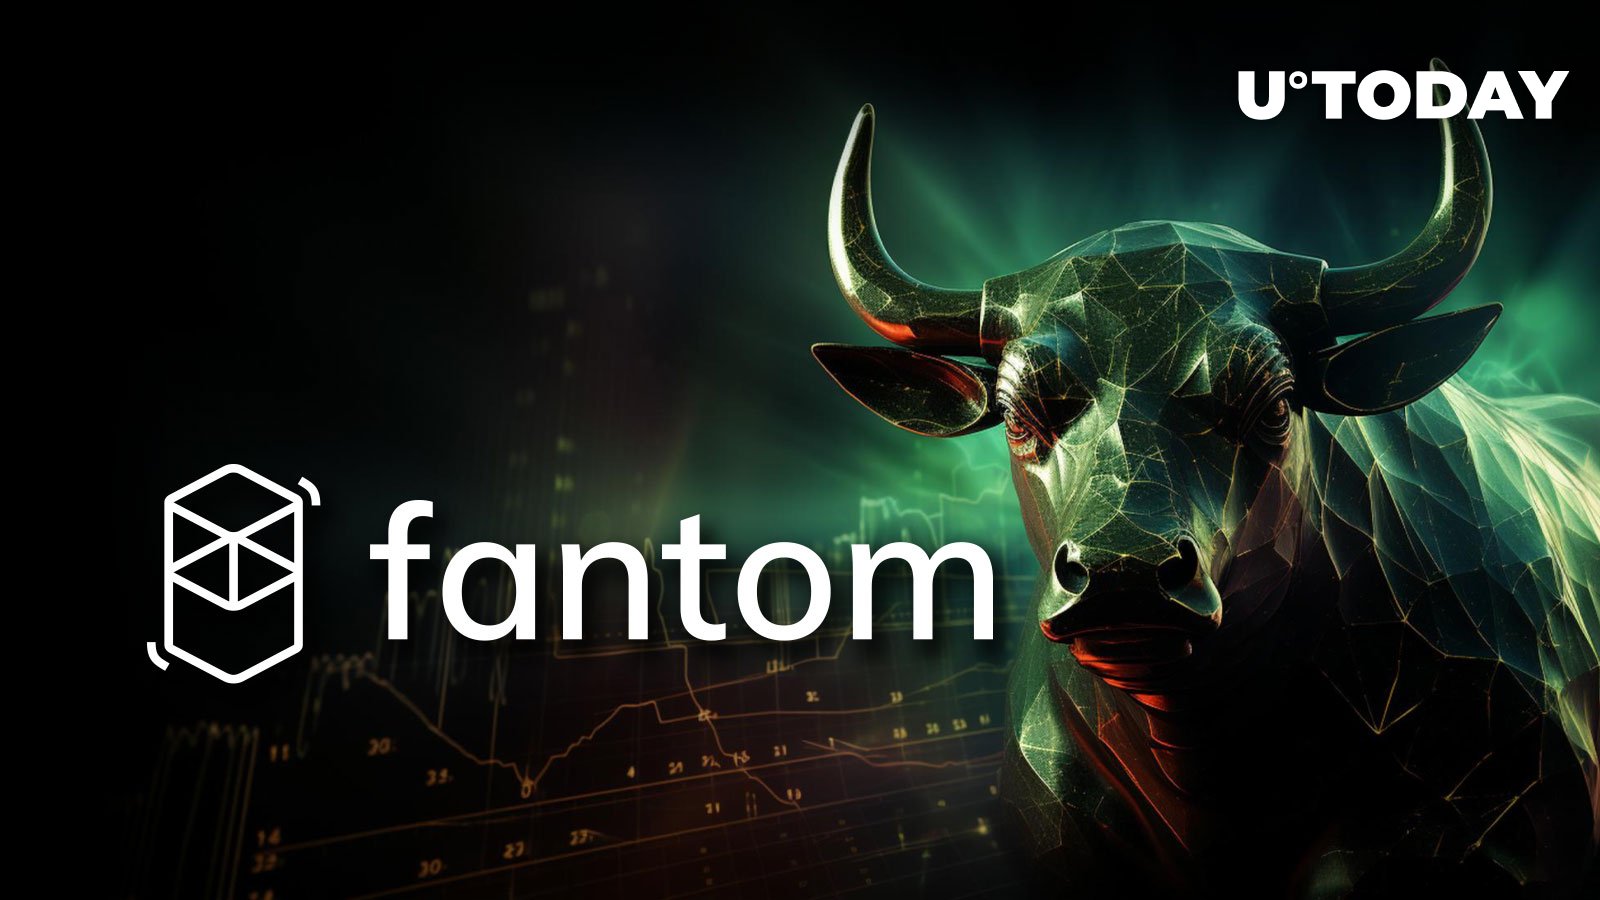 Fantom (FTM) Forms ‘W’ Pattern in Bullish Move, Top Analyst Predicts .60 Target